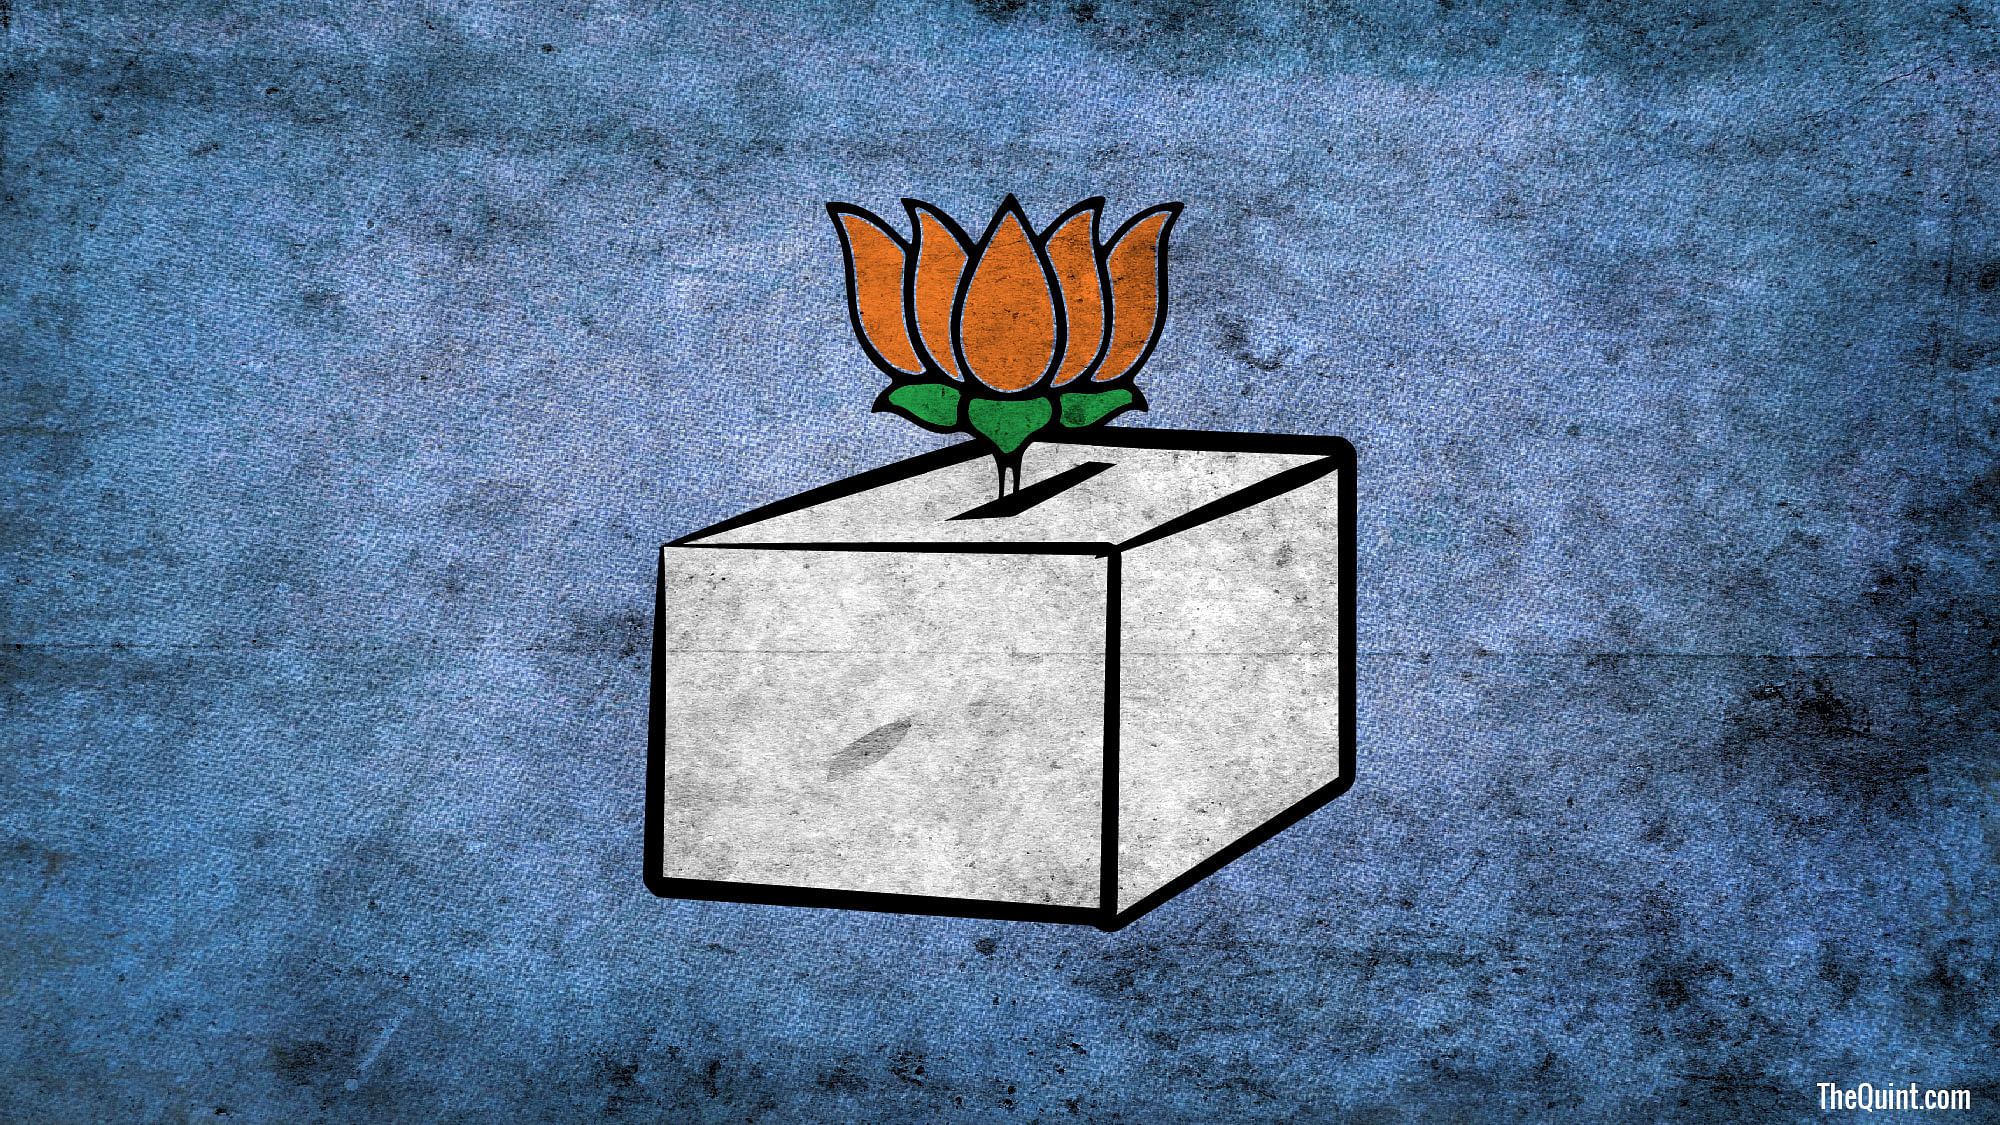 The BJP’s overall vote share dropped by nearly 10 percentage points in UP since the March 2017 Assembly elections.